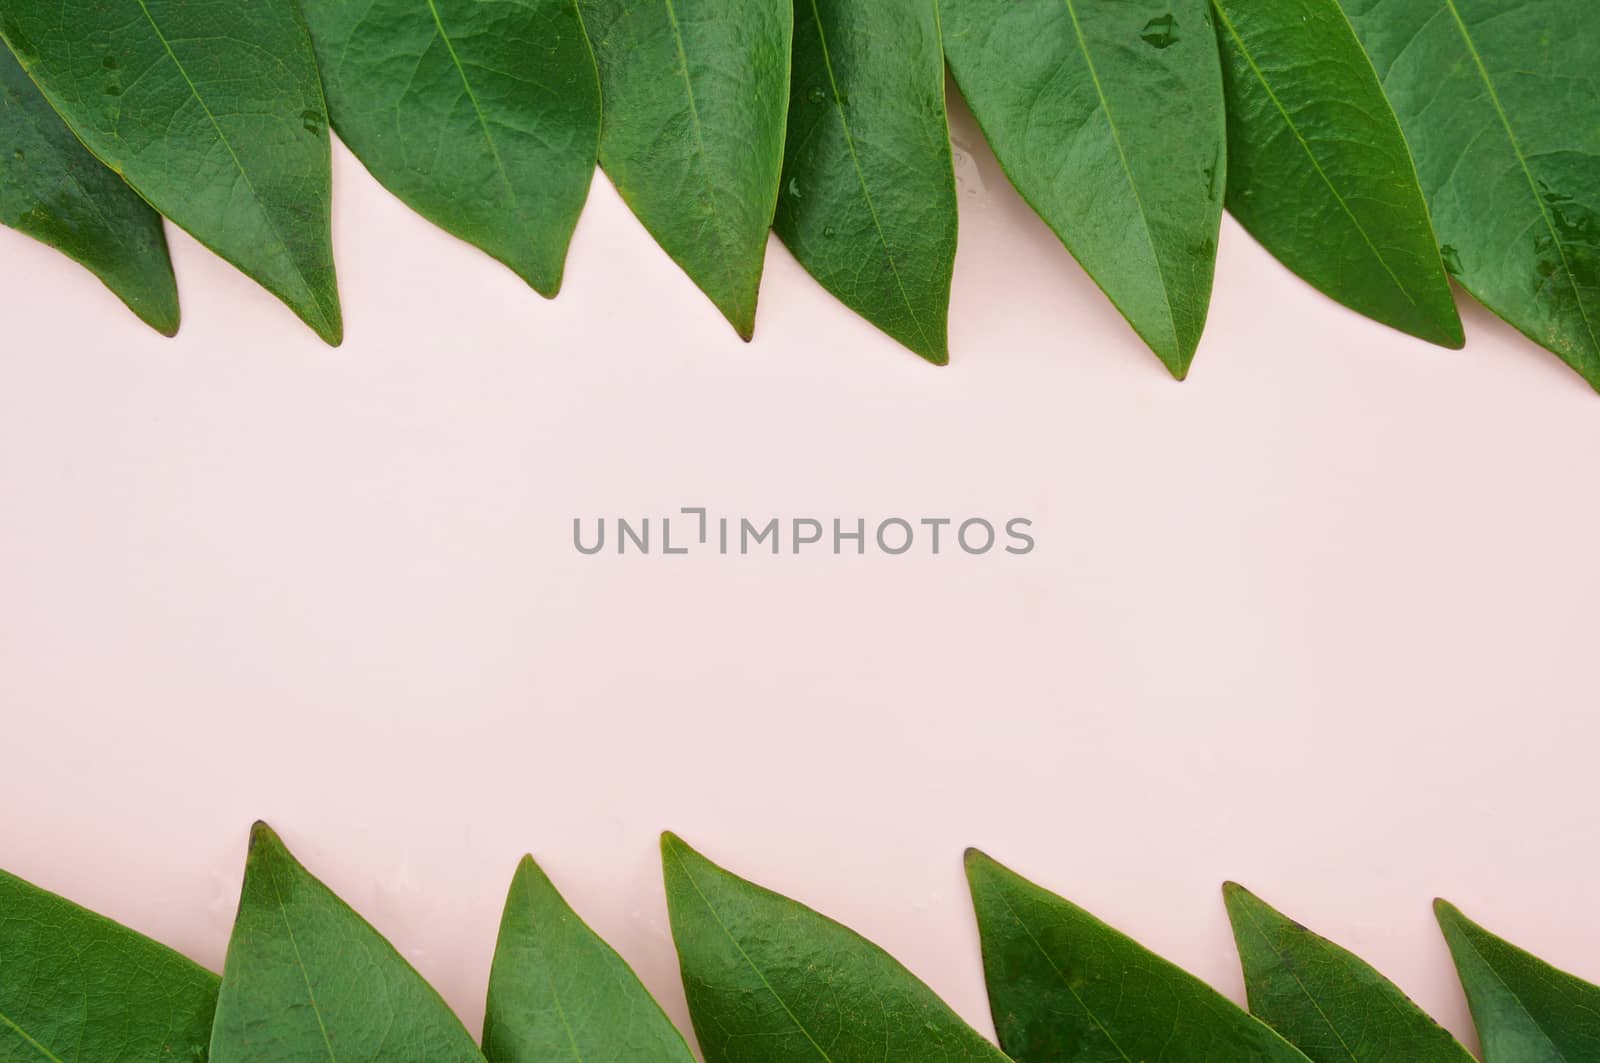 Leaves put line at top and bottom on pink tray as background texture.